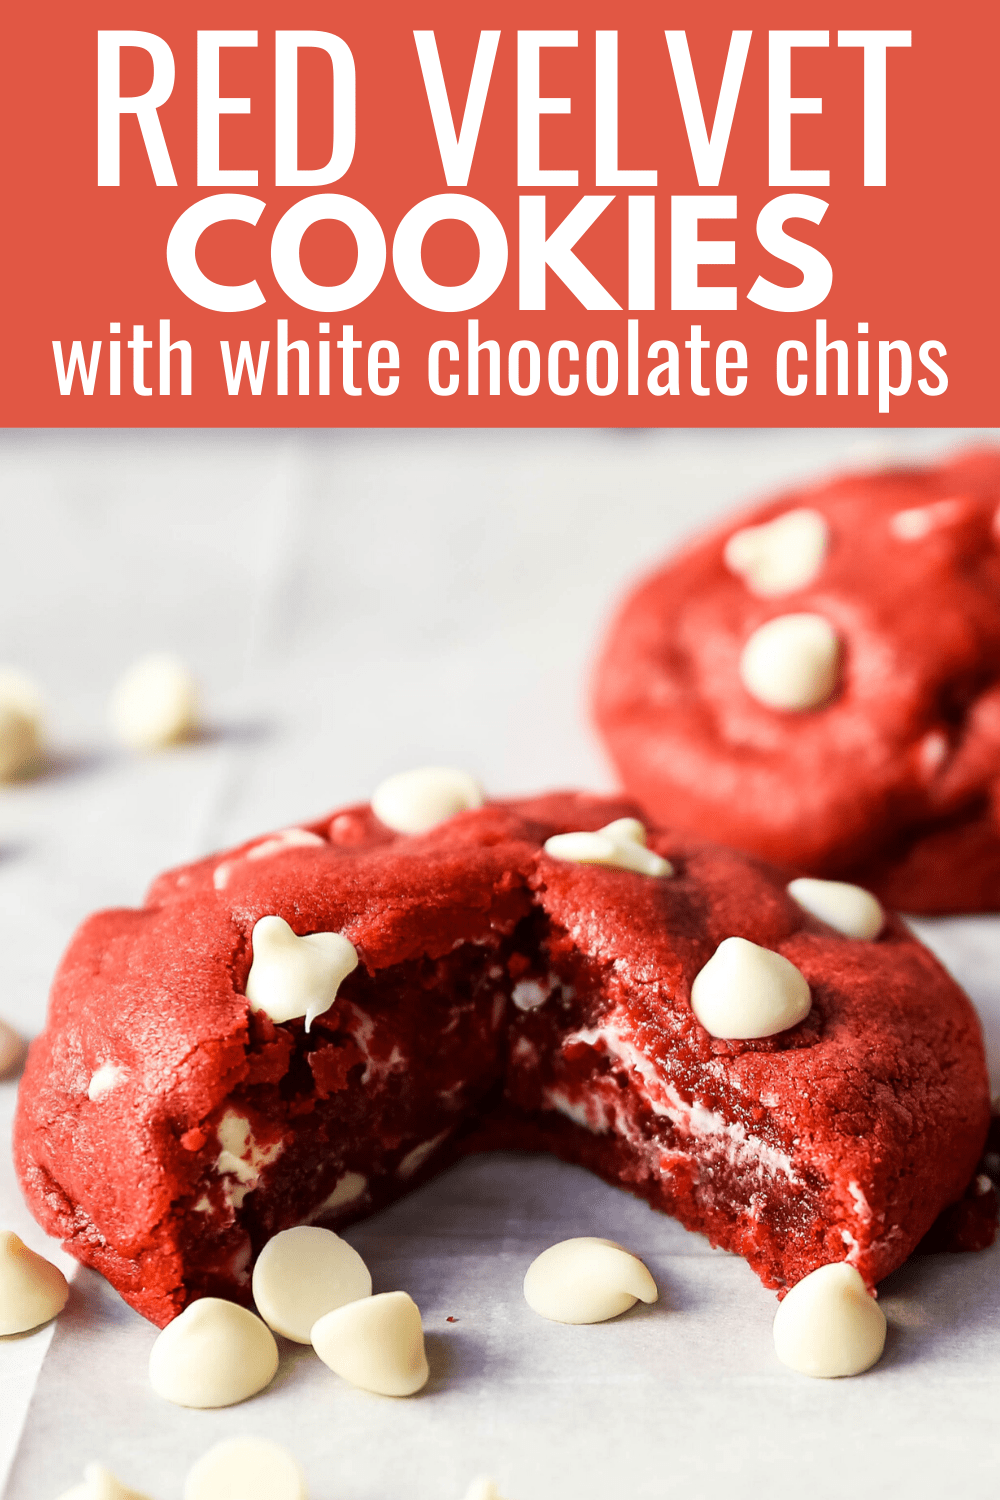 Red Velvet Cookies. Soft chewy famous Red Velvet Cookies with sweet white chocolate chips. www.modernhoney.com #redvelvet #redvelvetcookies #cookies #4thofJuly